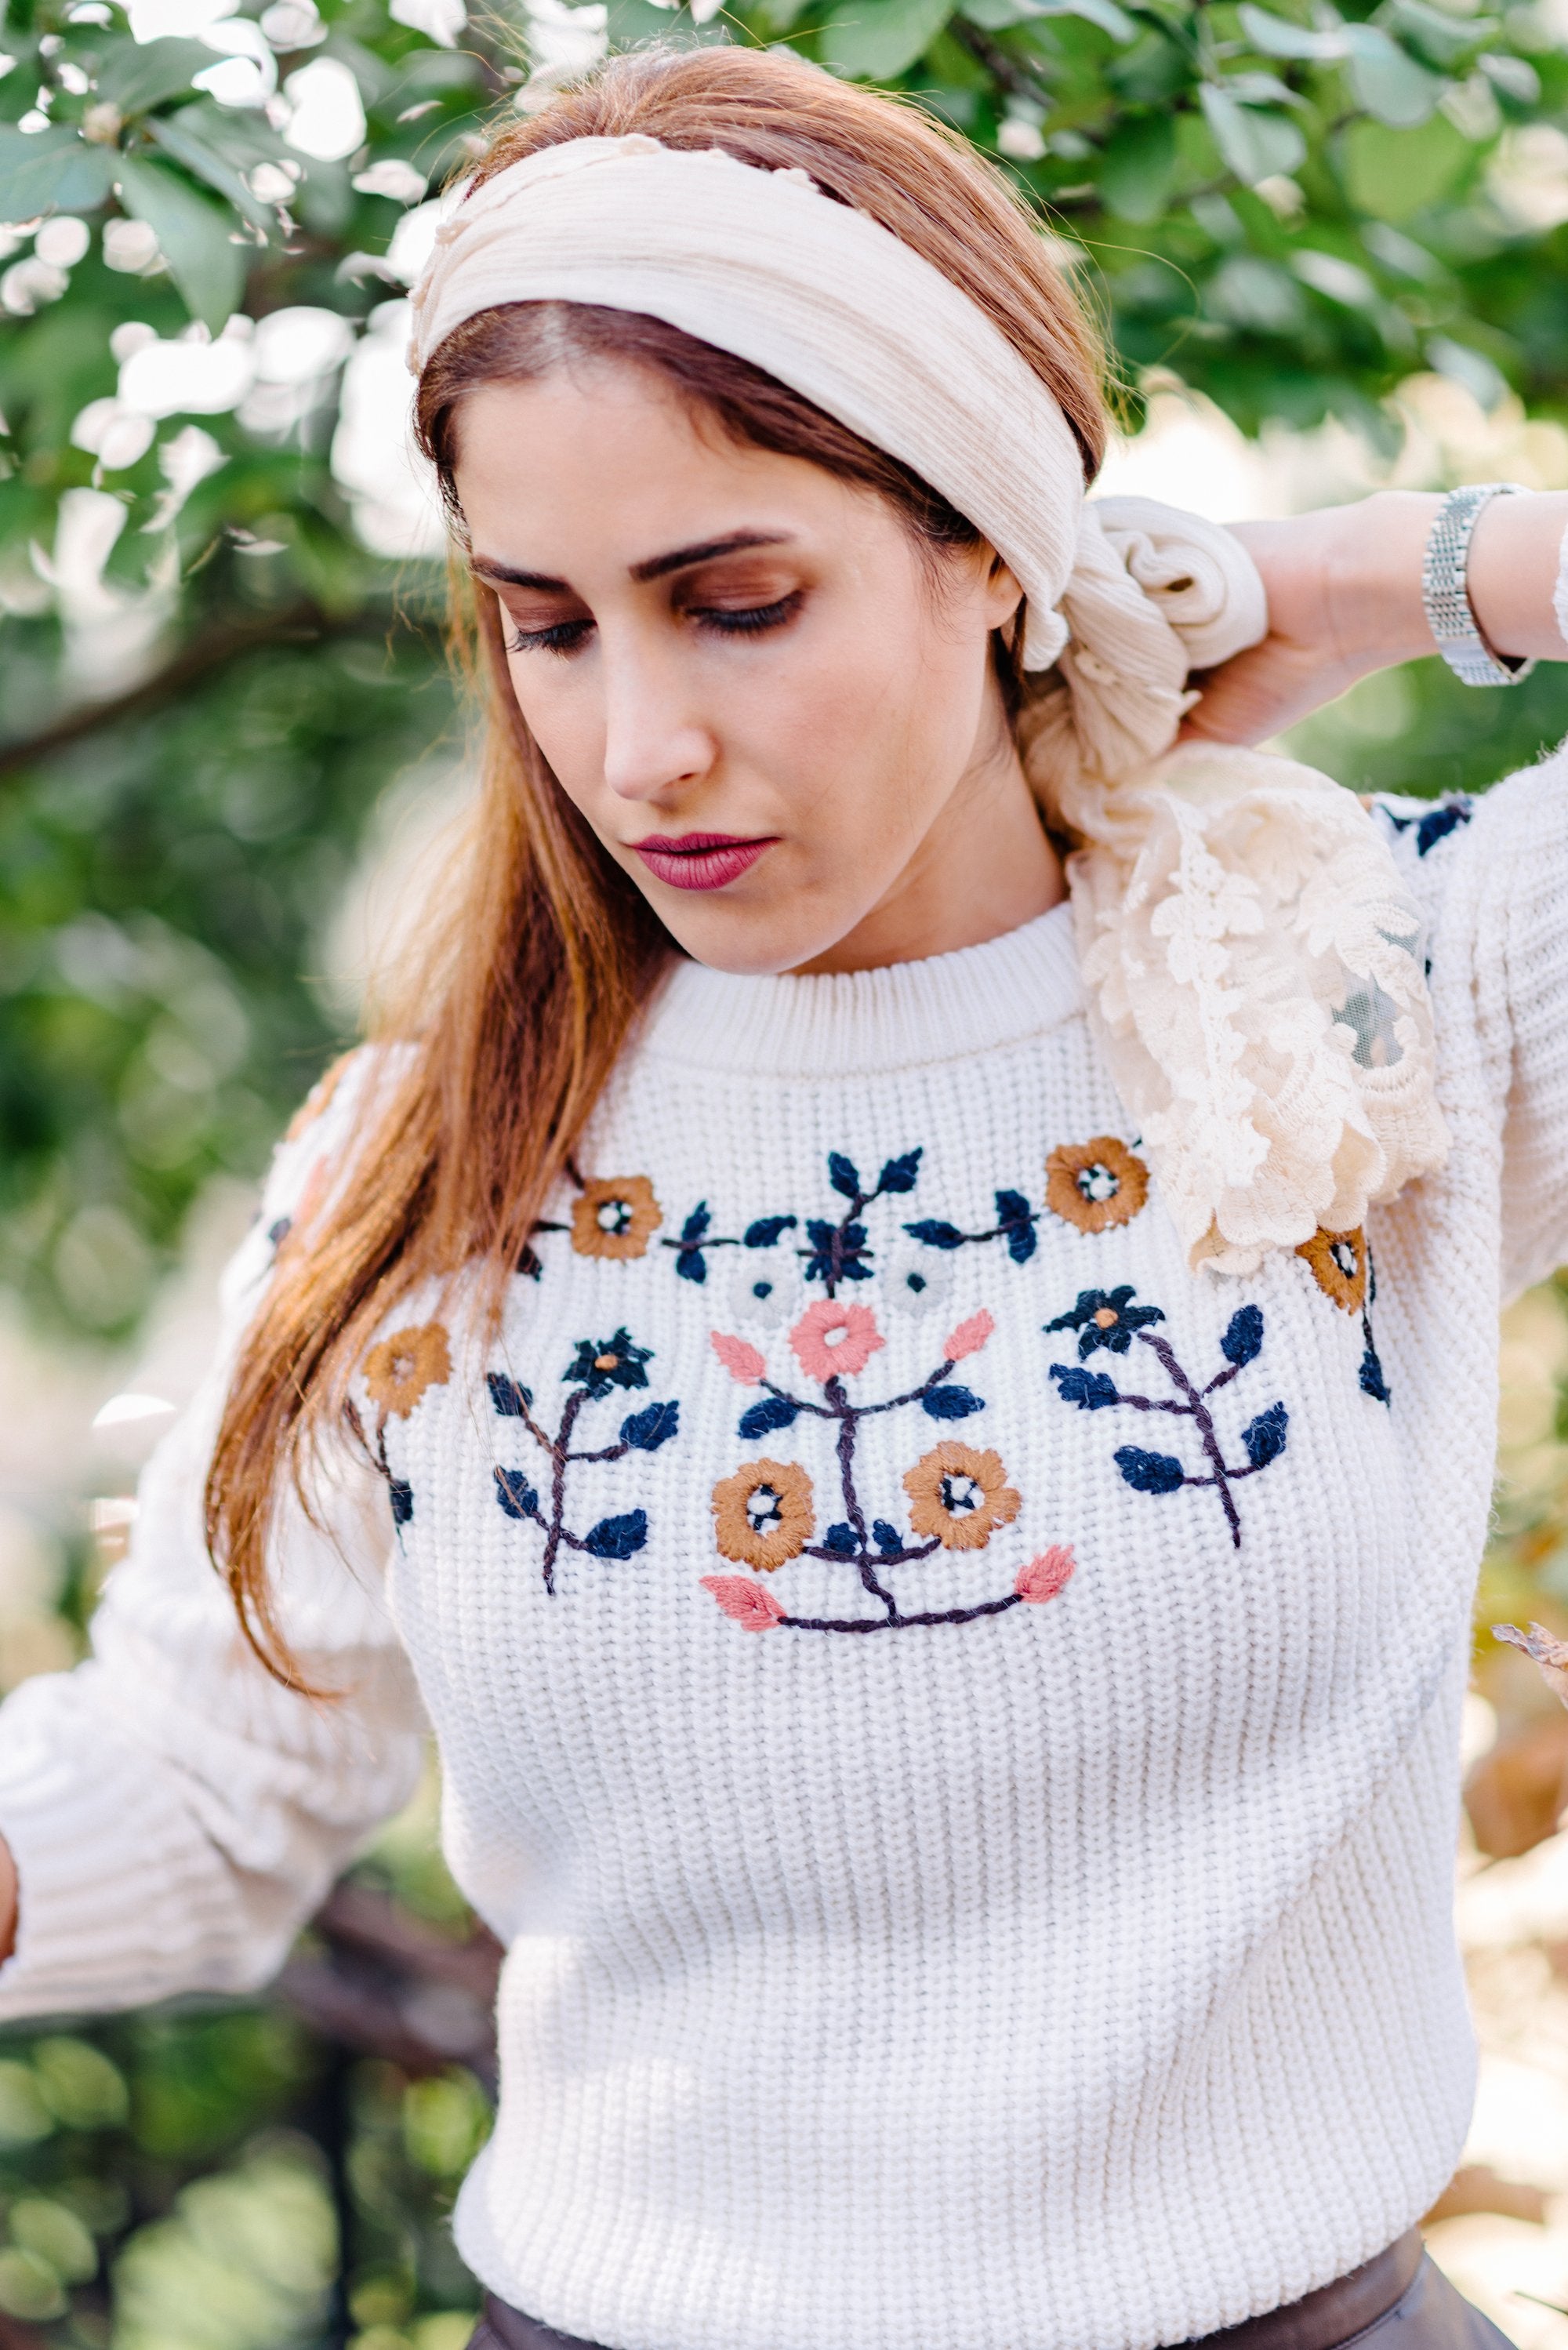 Emy Floral Embroidered Sweater - Reina Valentina